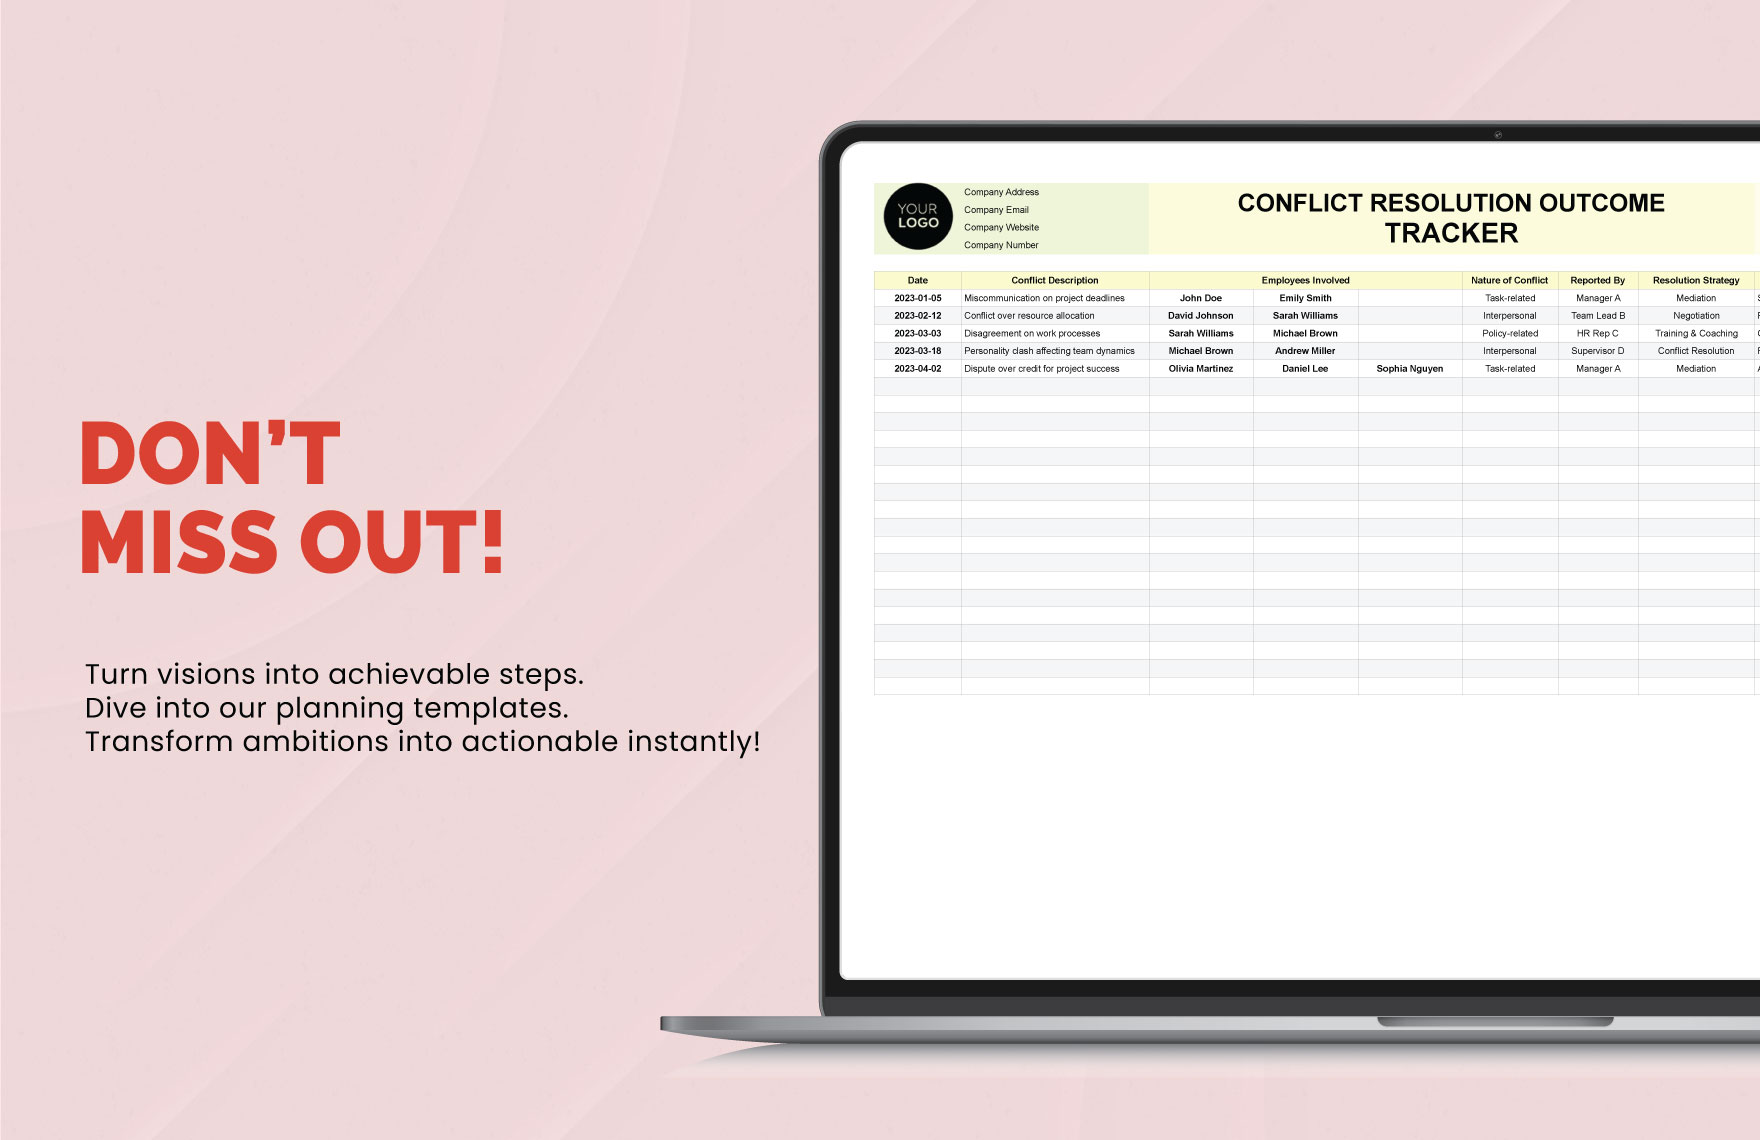 Conflict Resolution Outcome Tracker HR Template